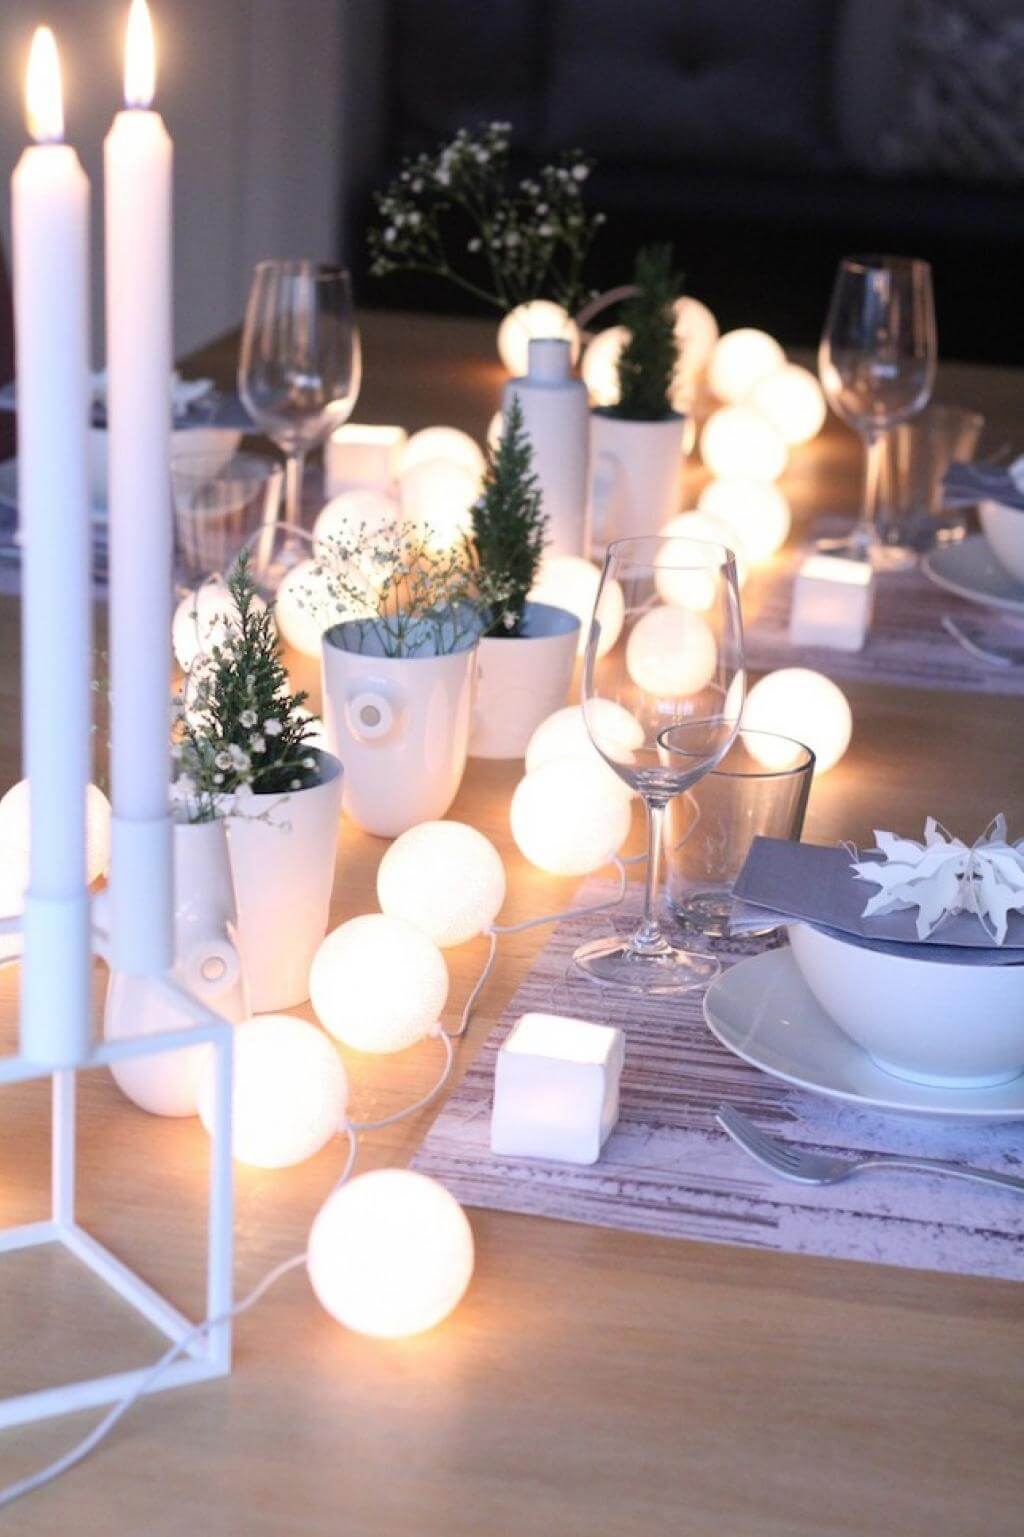 Simple Christmas table decor in the middle